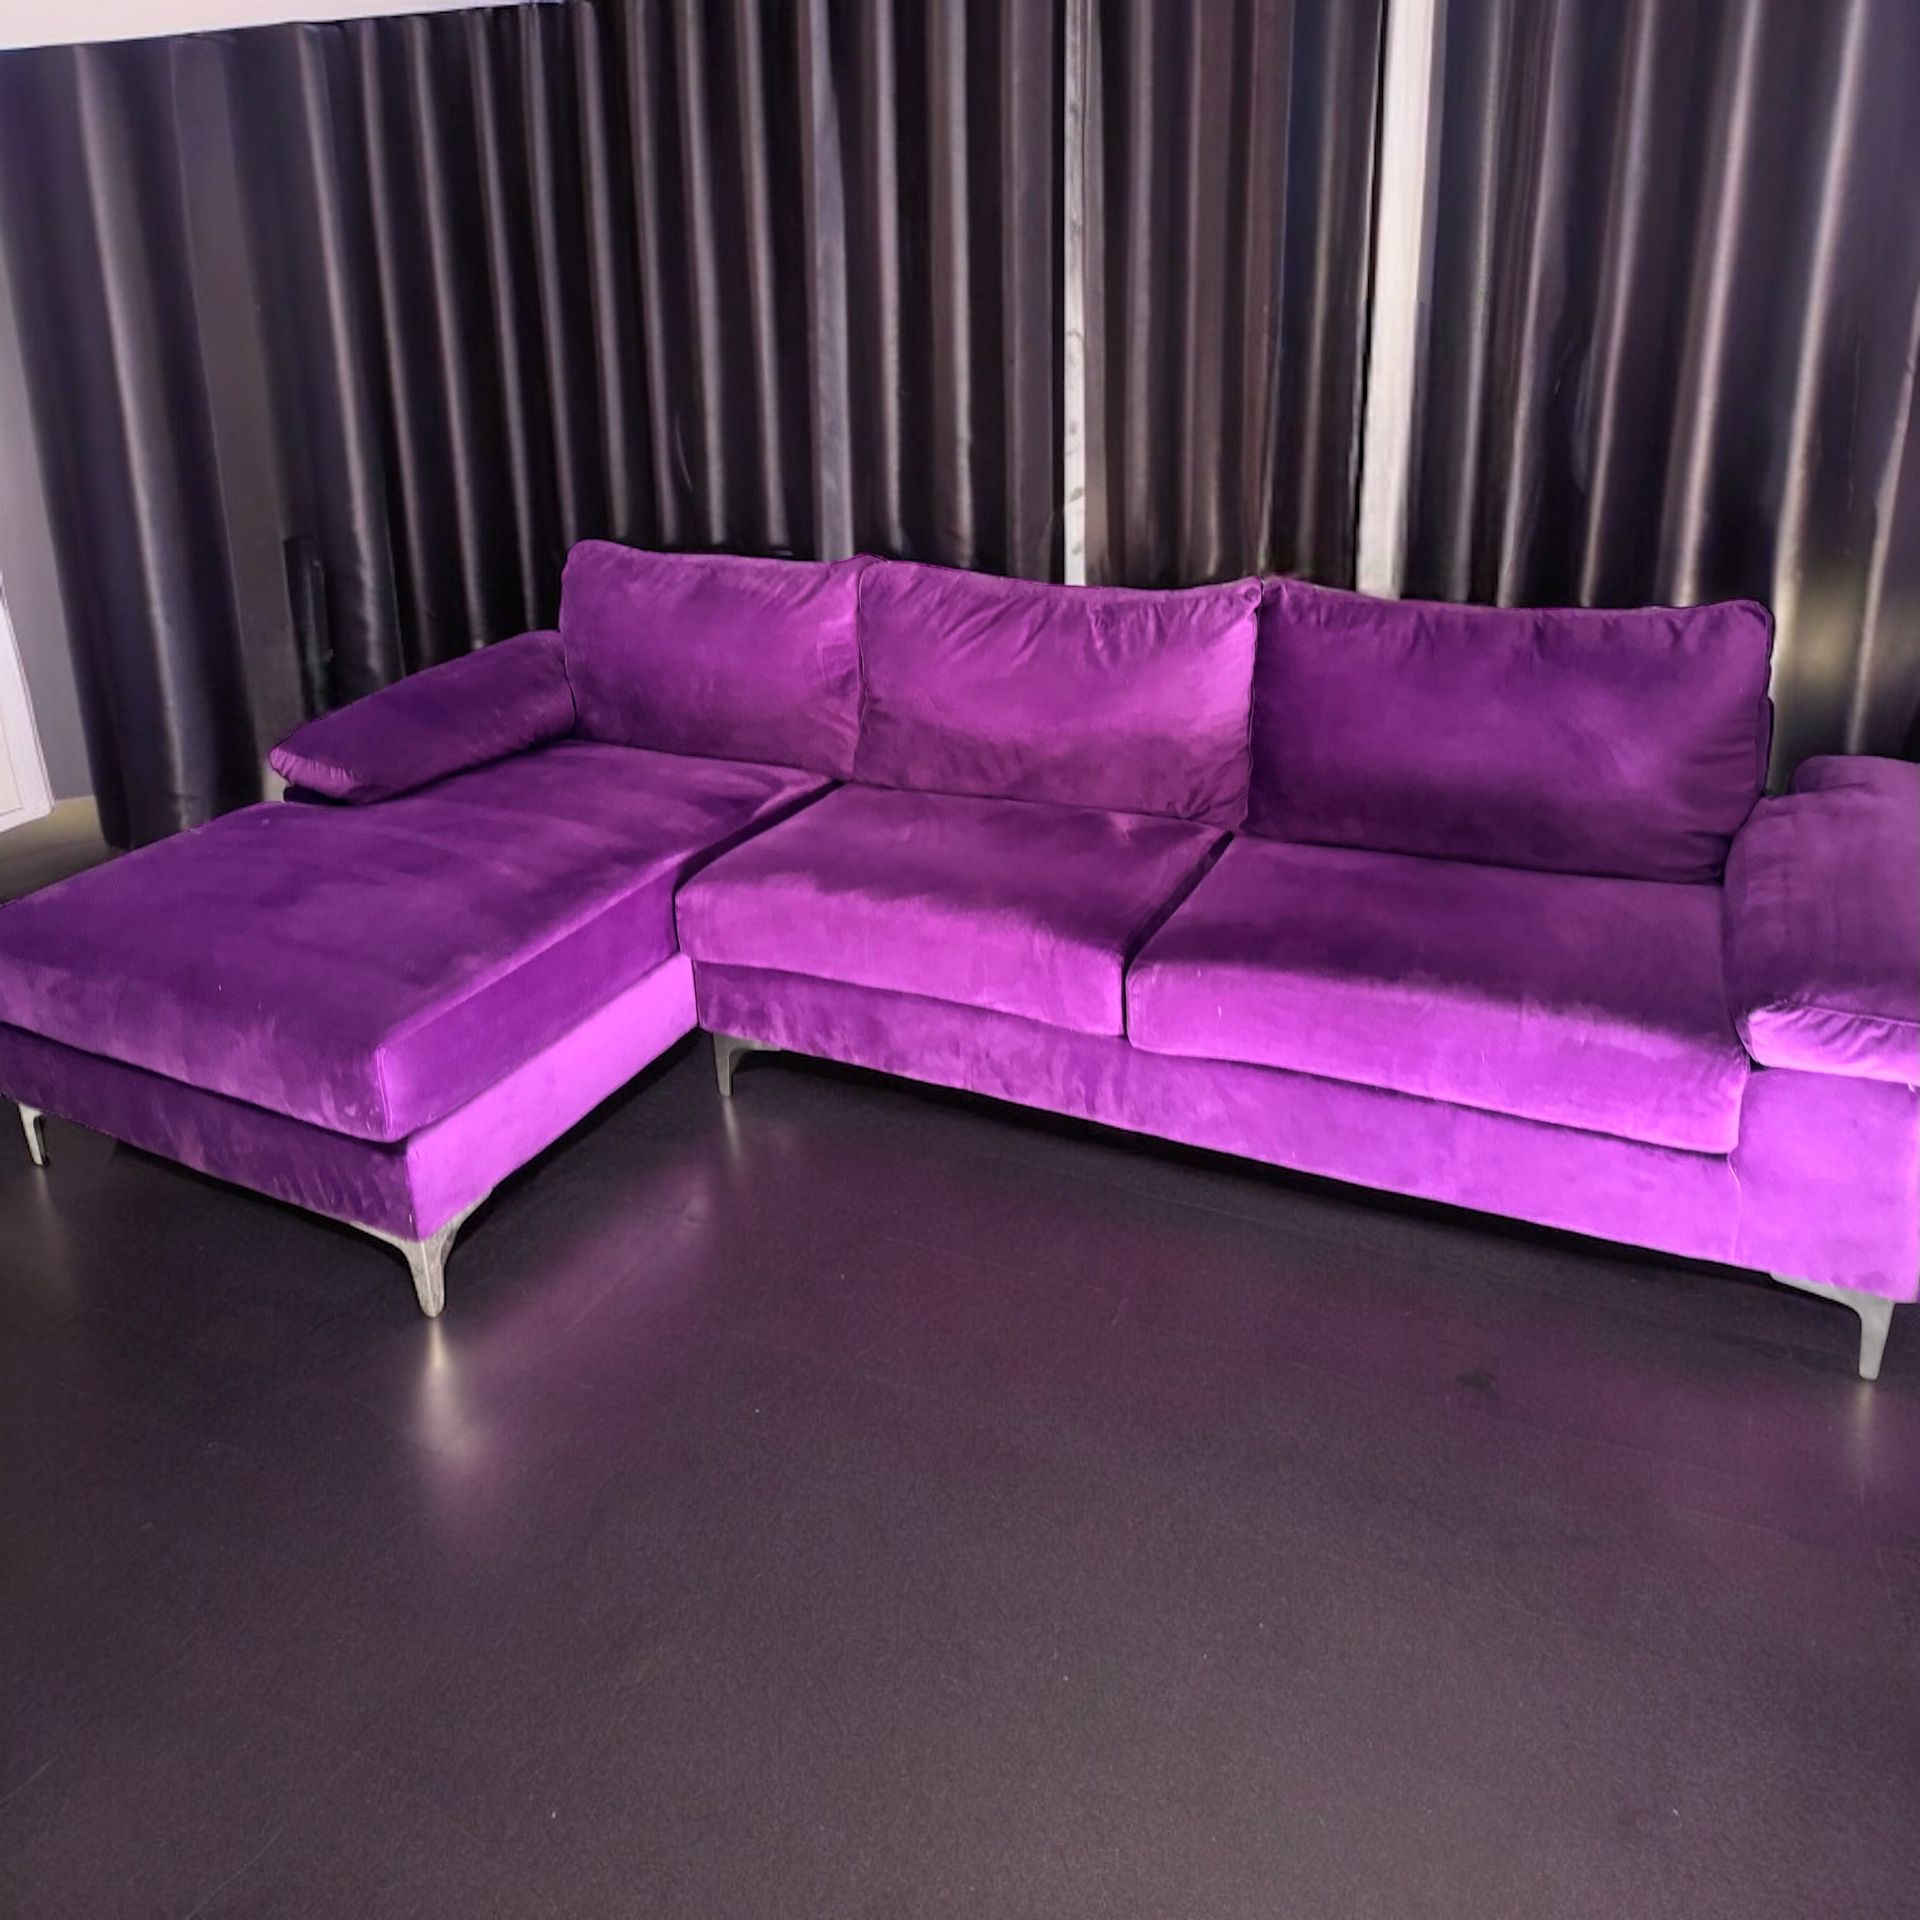 Purple Modern Sectional Sofa Couch with Chaise Lounge****pending